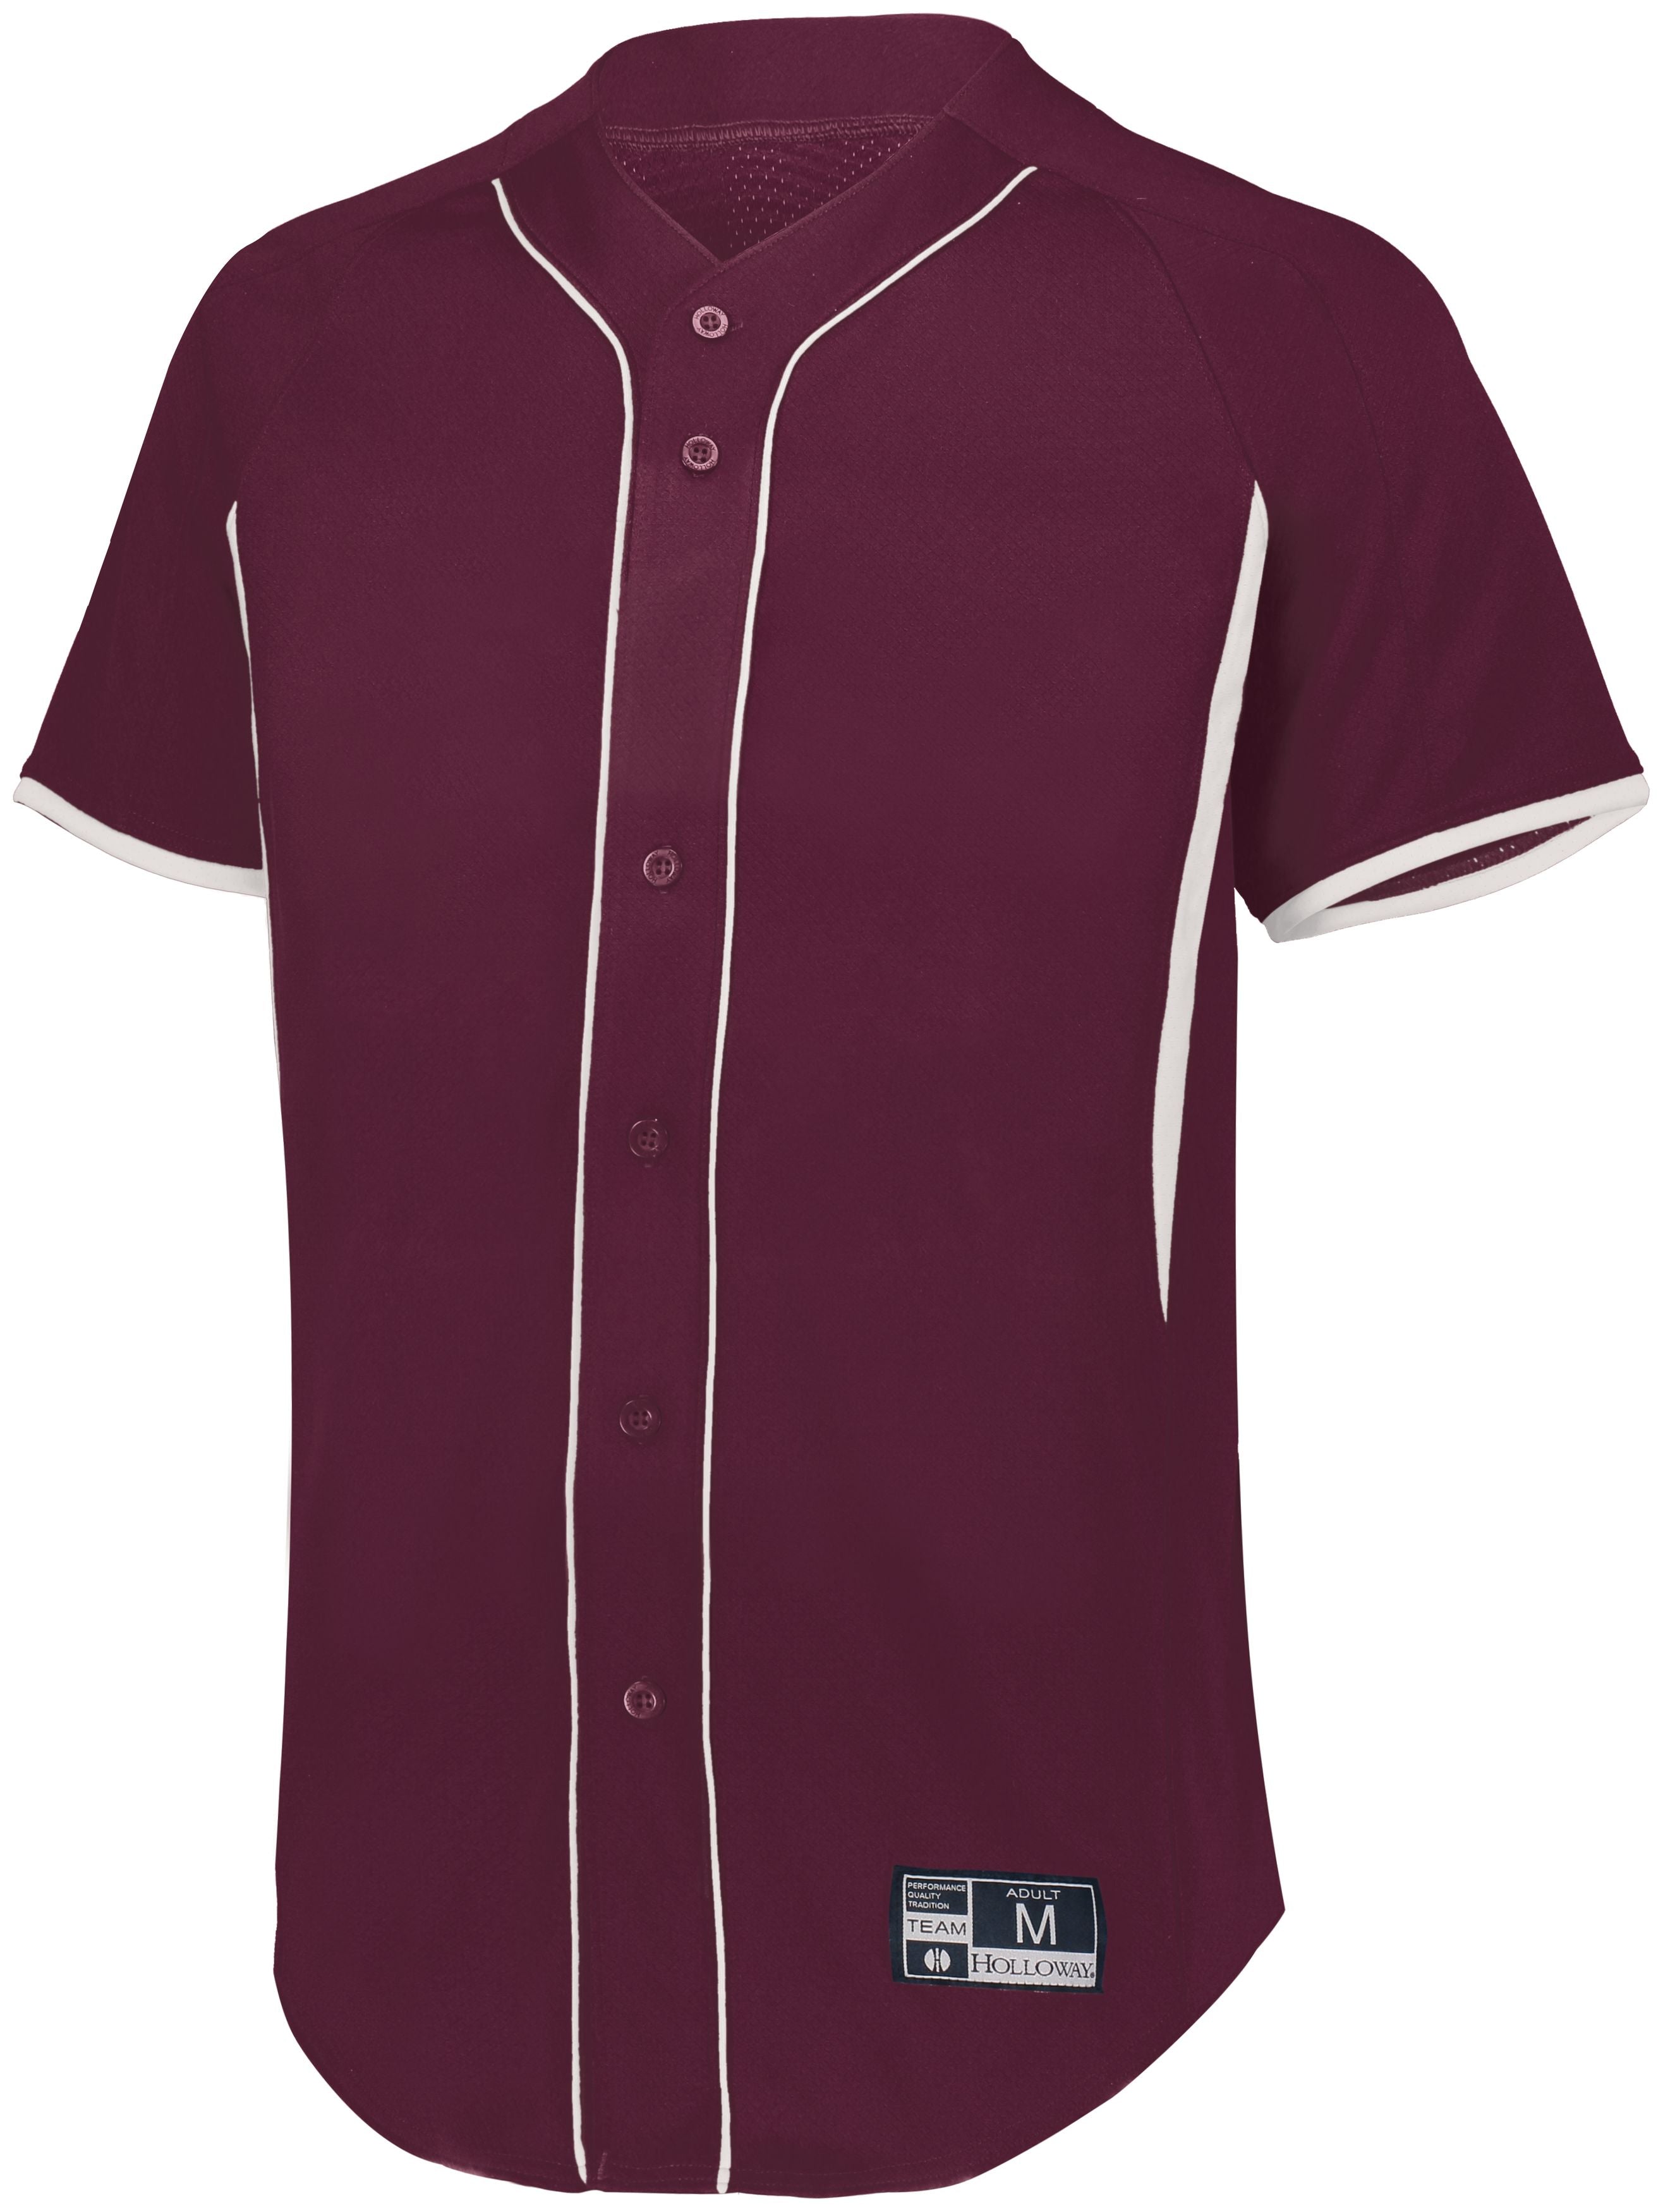 Holloway Game7 Full-Button Baseball Jersey in Maroon/White  -Part of the Adult, Adult-Jersey, Baseball, Holloway, Shirts, All-Sports, All-Sports-1 product lines at KanaleyCreations.com